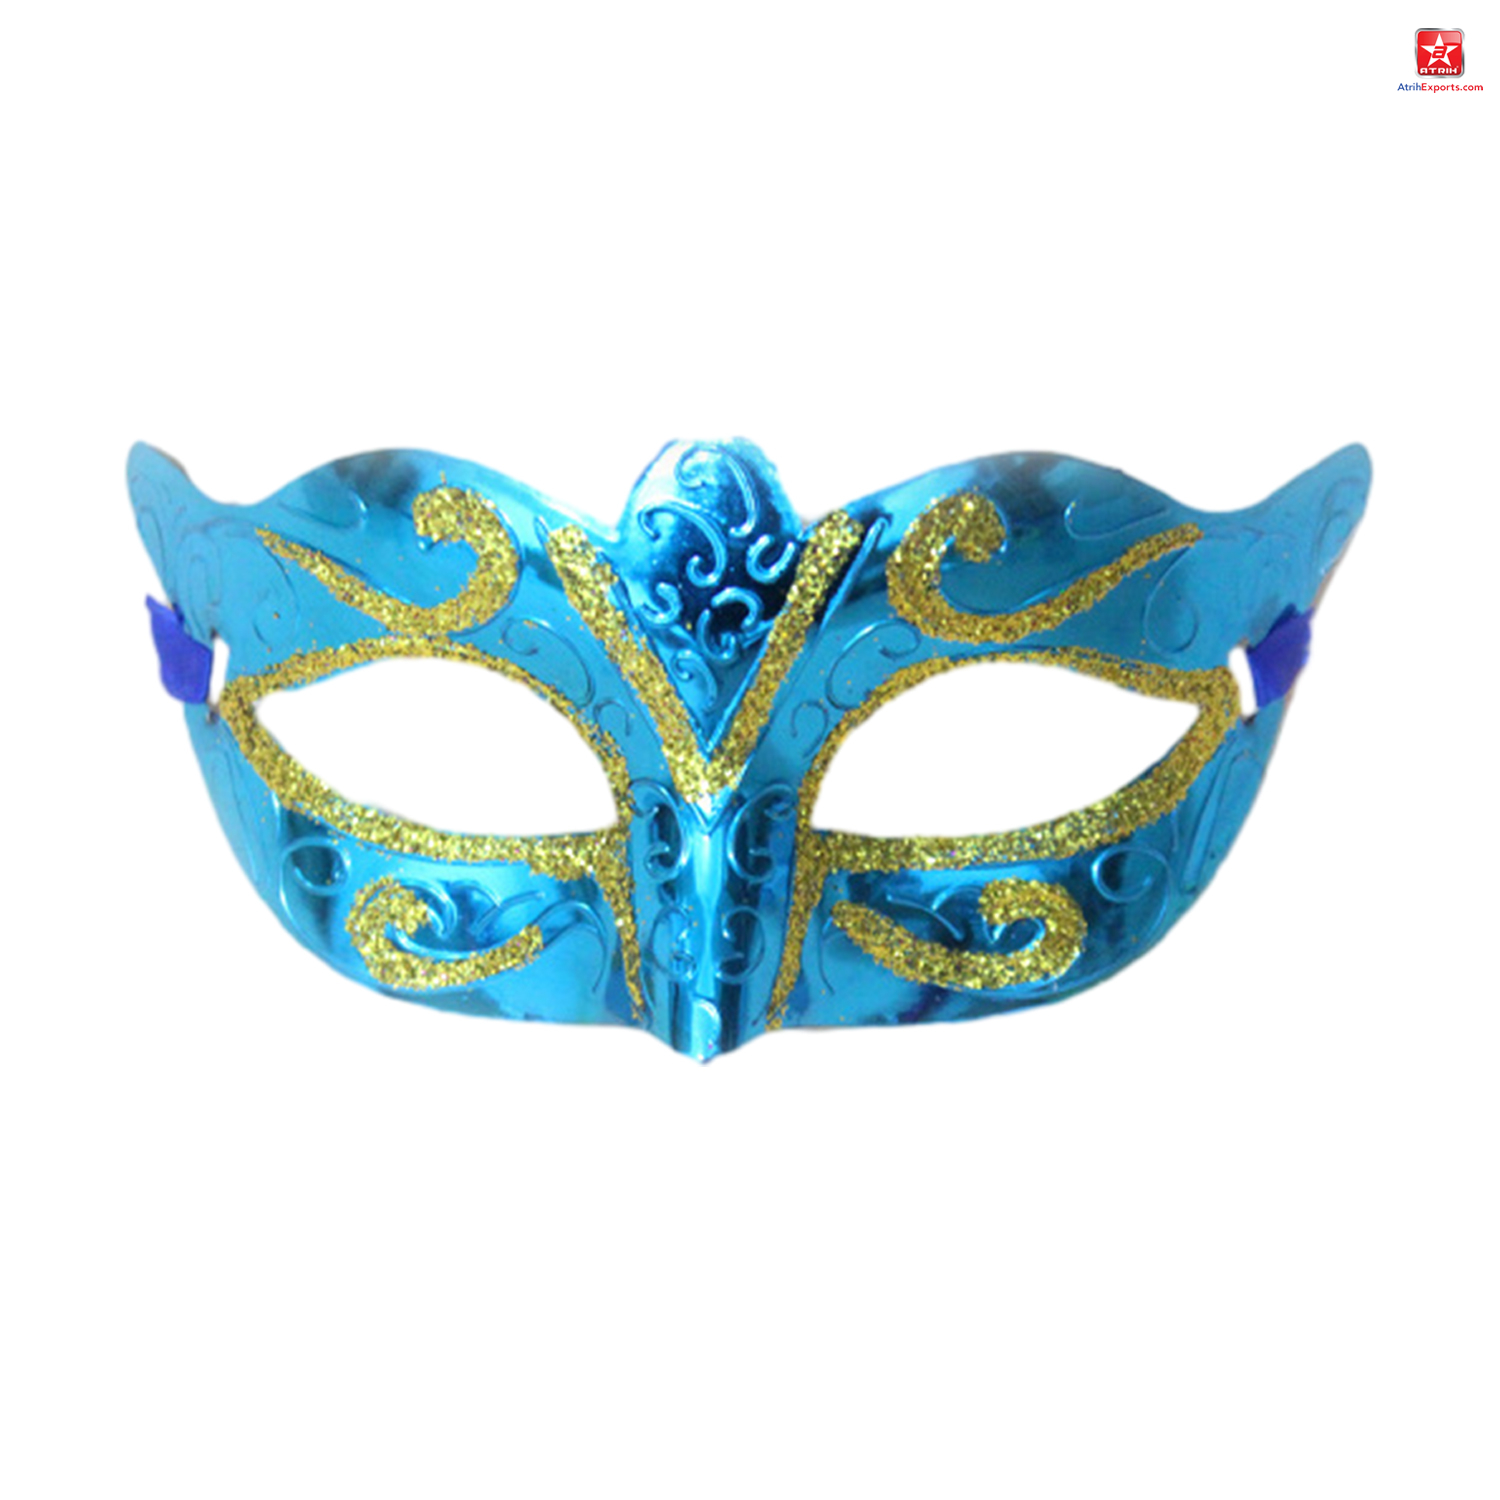 Cheap Price Festival Half Face mask Electroplated PP The Halloween Party Performs Masquerade mask